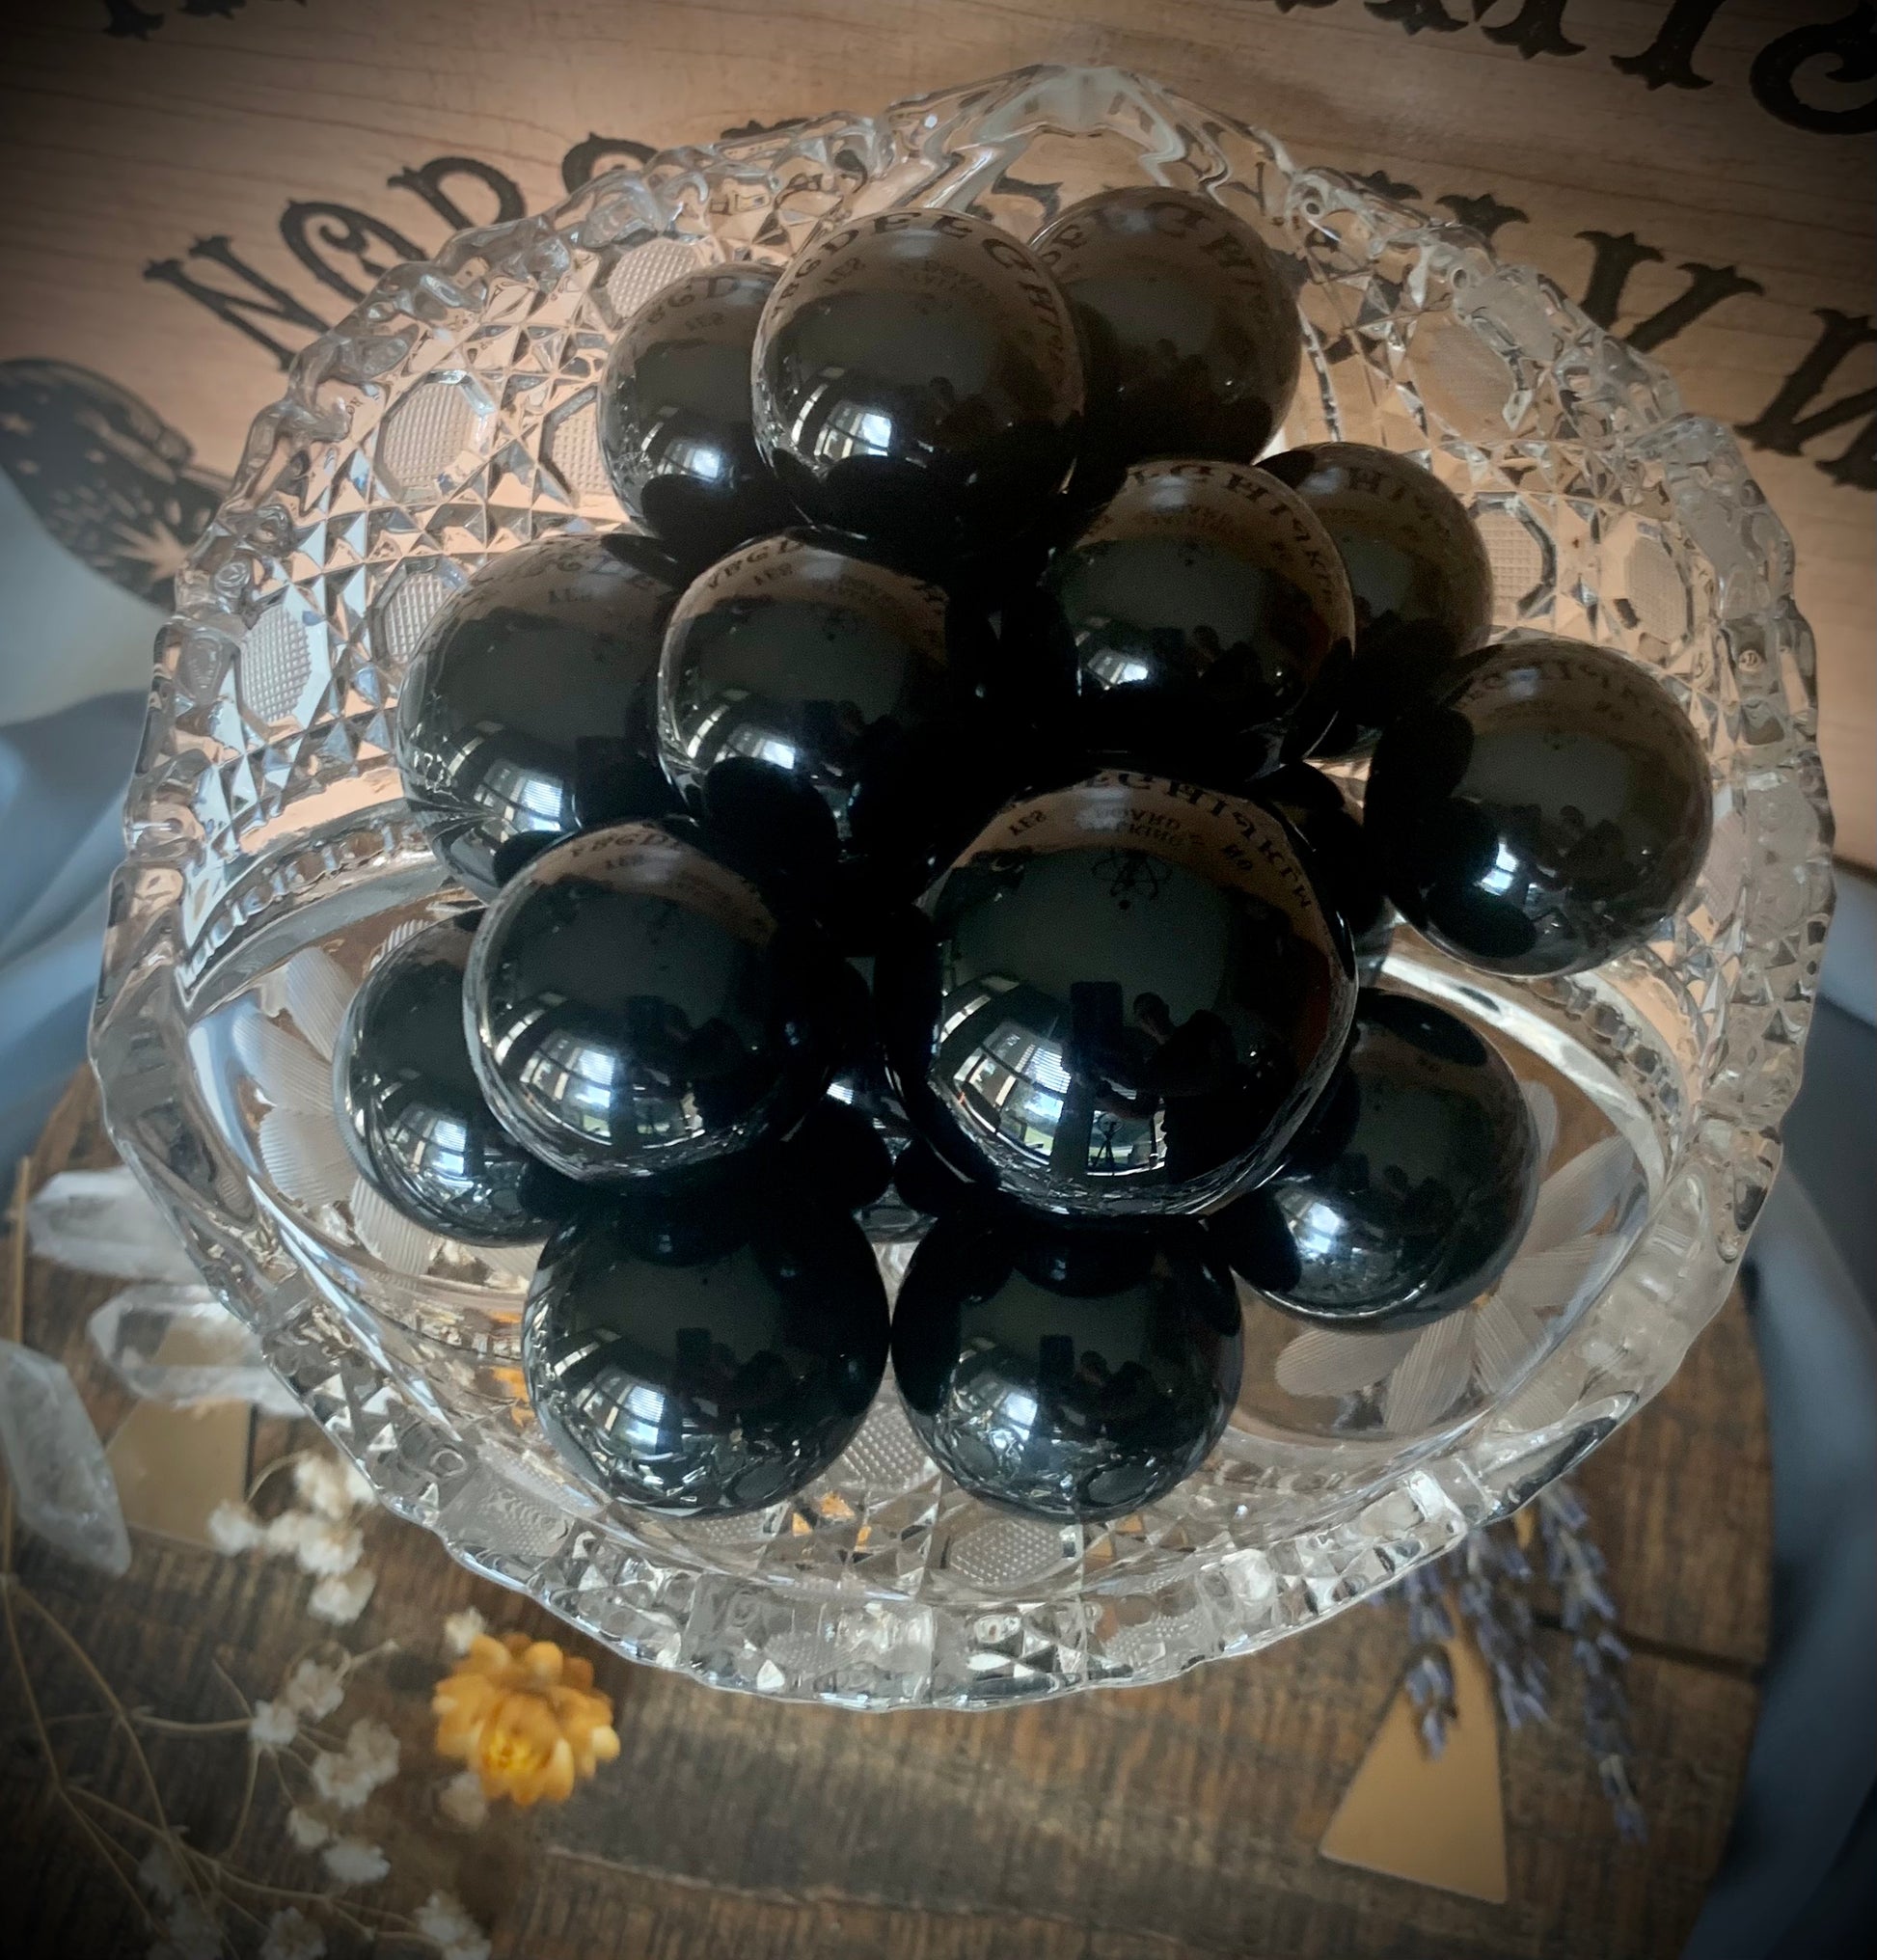 A clear crystal bowl full of reflective black obsidian spheres